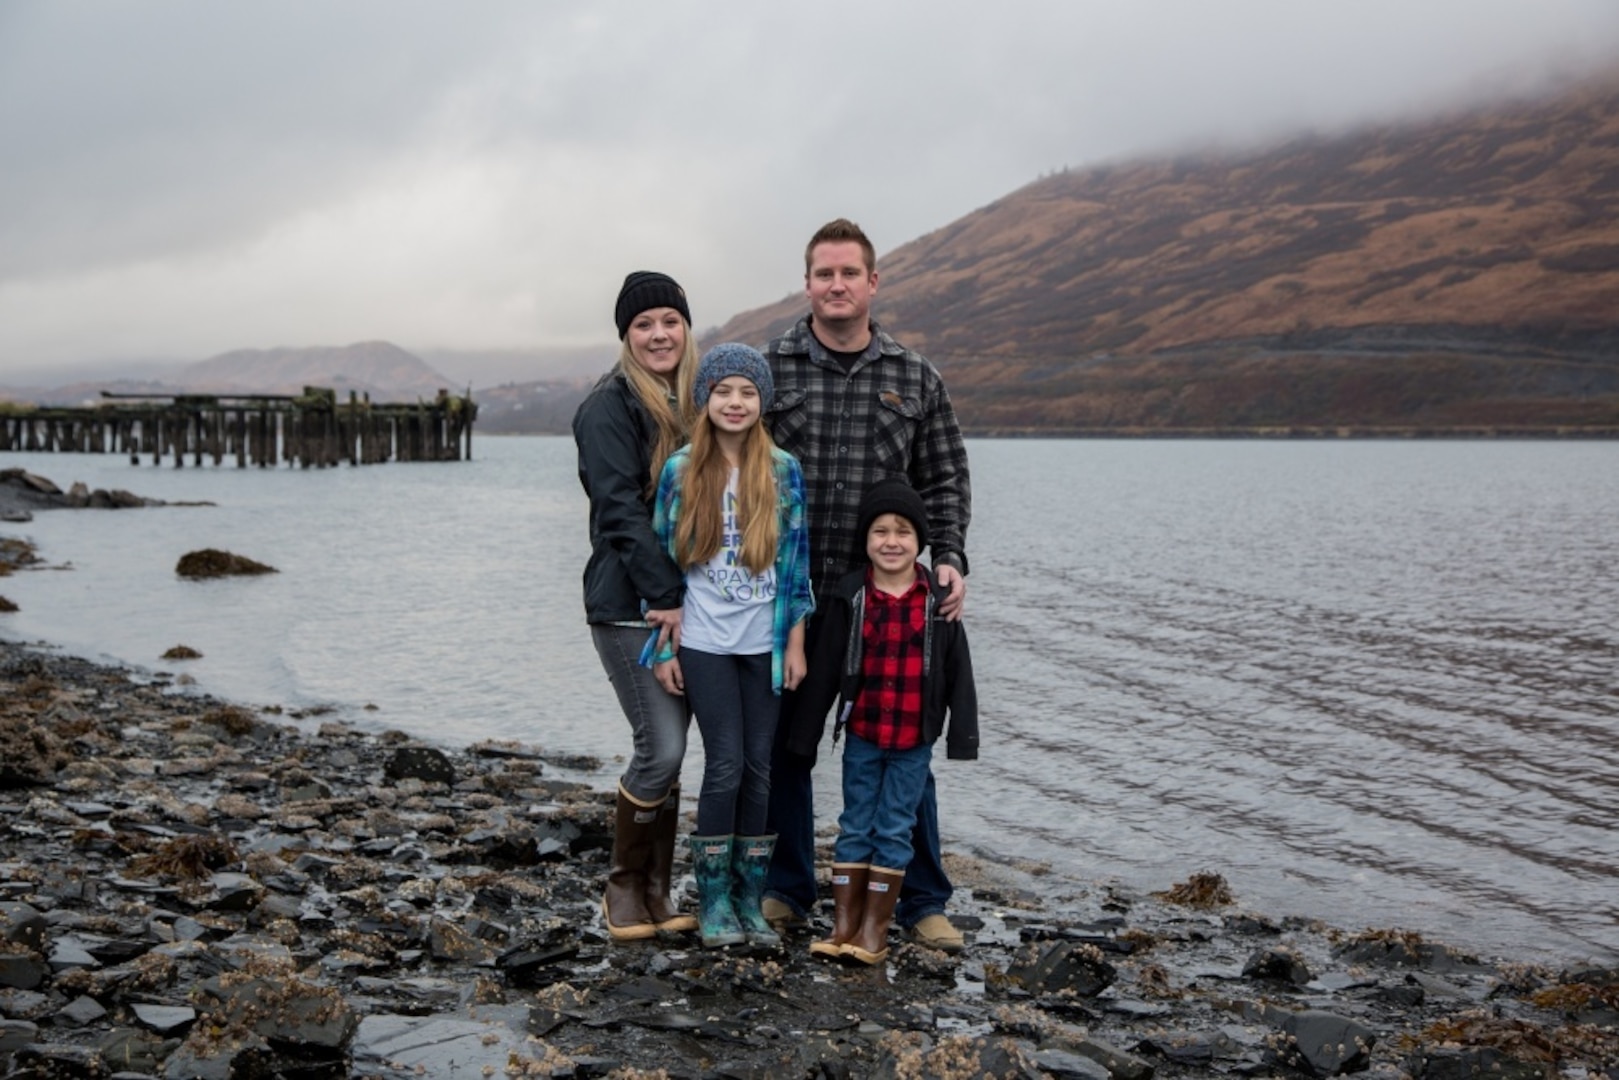 Coast Guard Petty Officer 1st Class Casey Lawrence and her spouse, Justin, also a Coast Guard member, stand with their children on Base Kodiak, Alaska, Nov. 3, 2018. Casey and her family enjoy all that Kodiak has to offer and they recently purchased their retirement home in Kodiak. U.S. Coast Guard photo by Petty Officer 1st Class Charly Hengen.